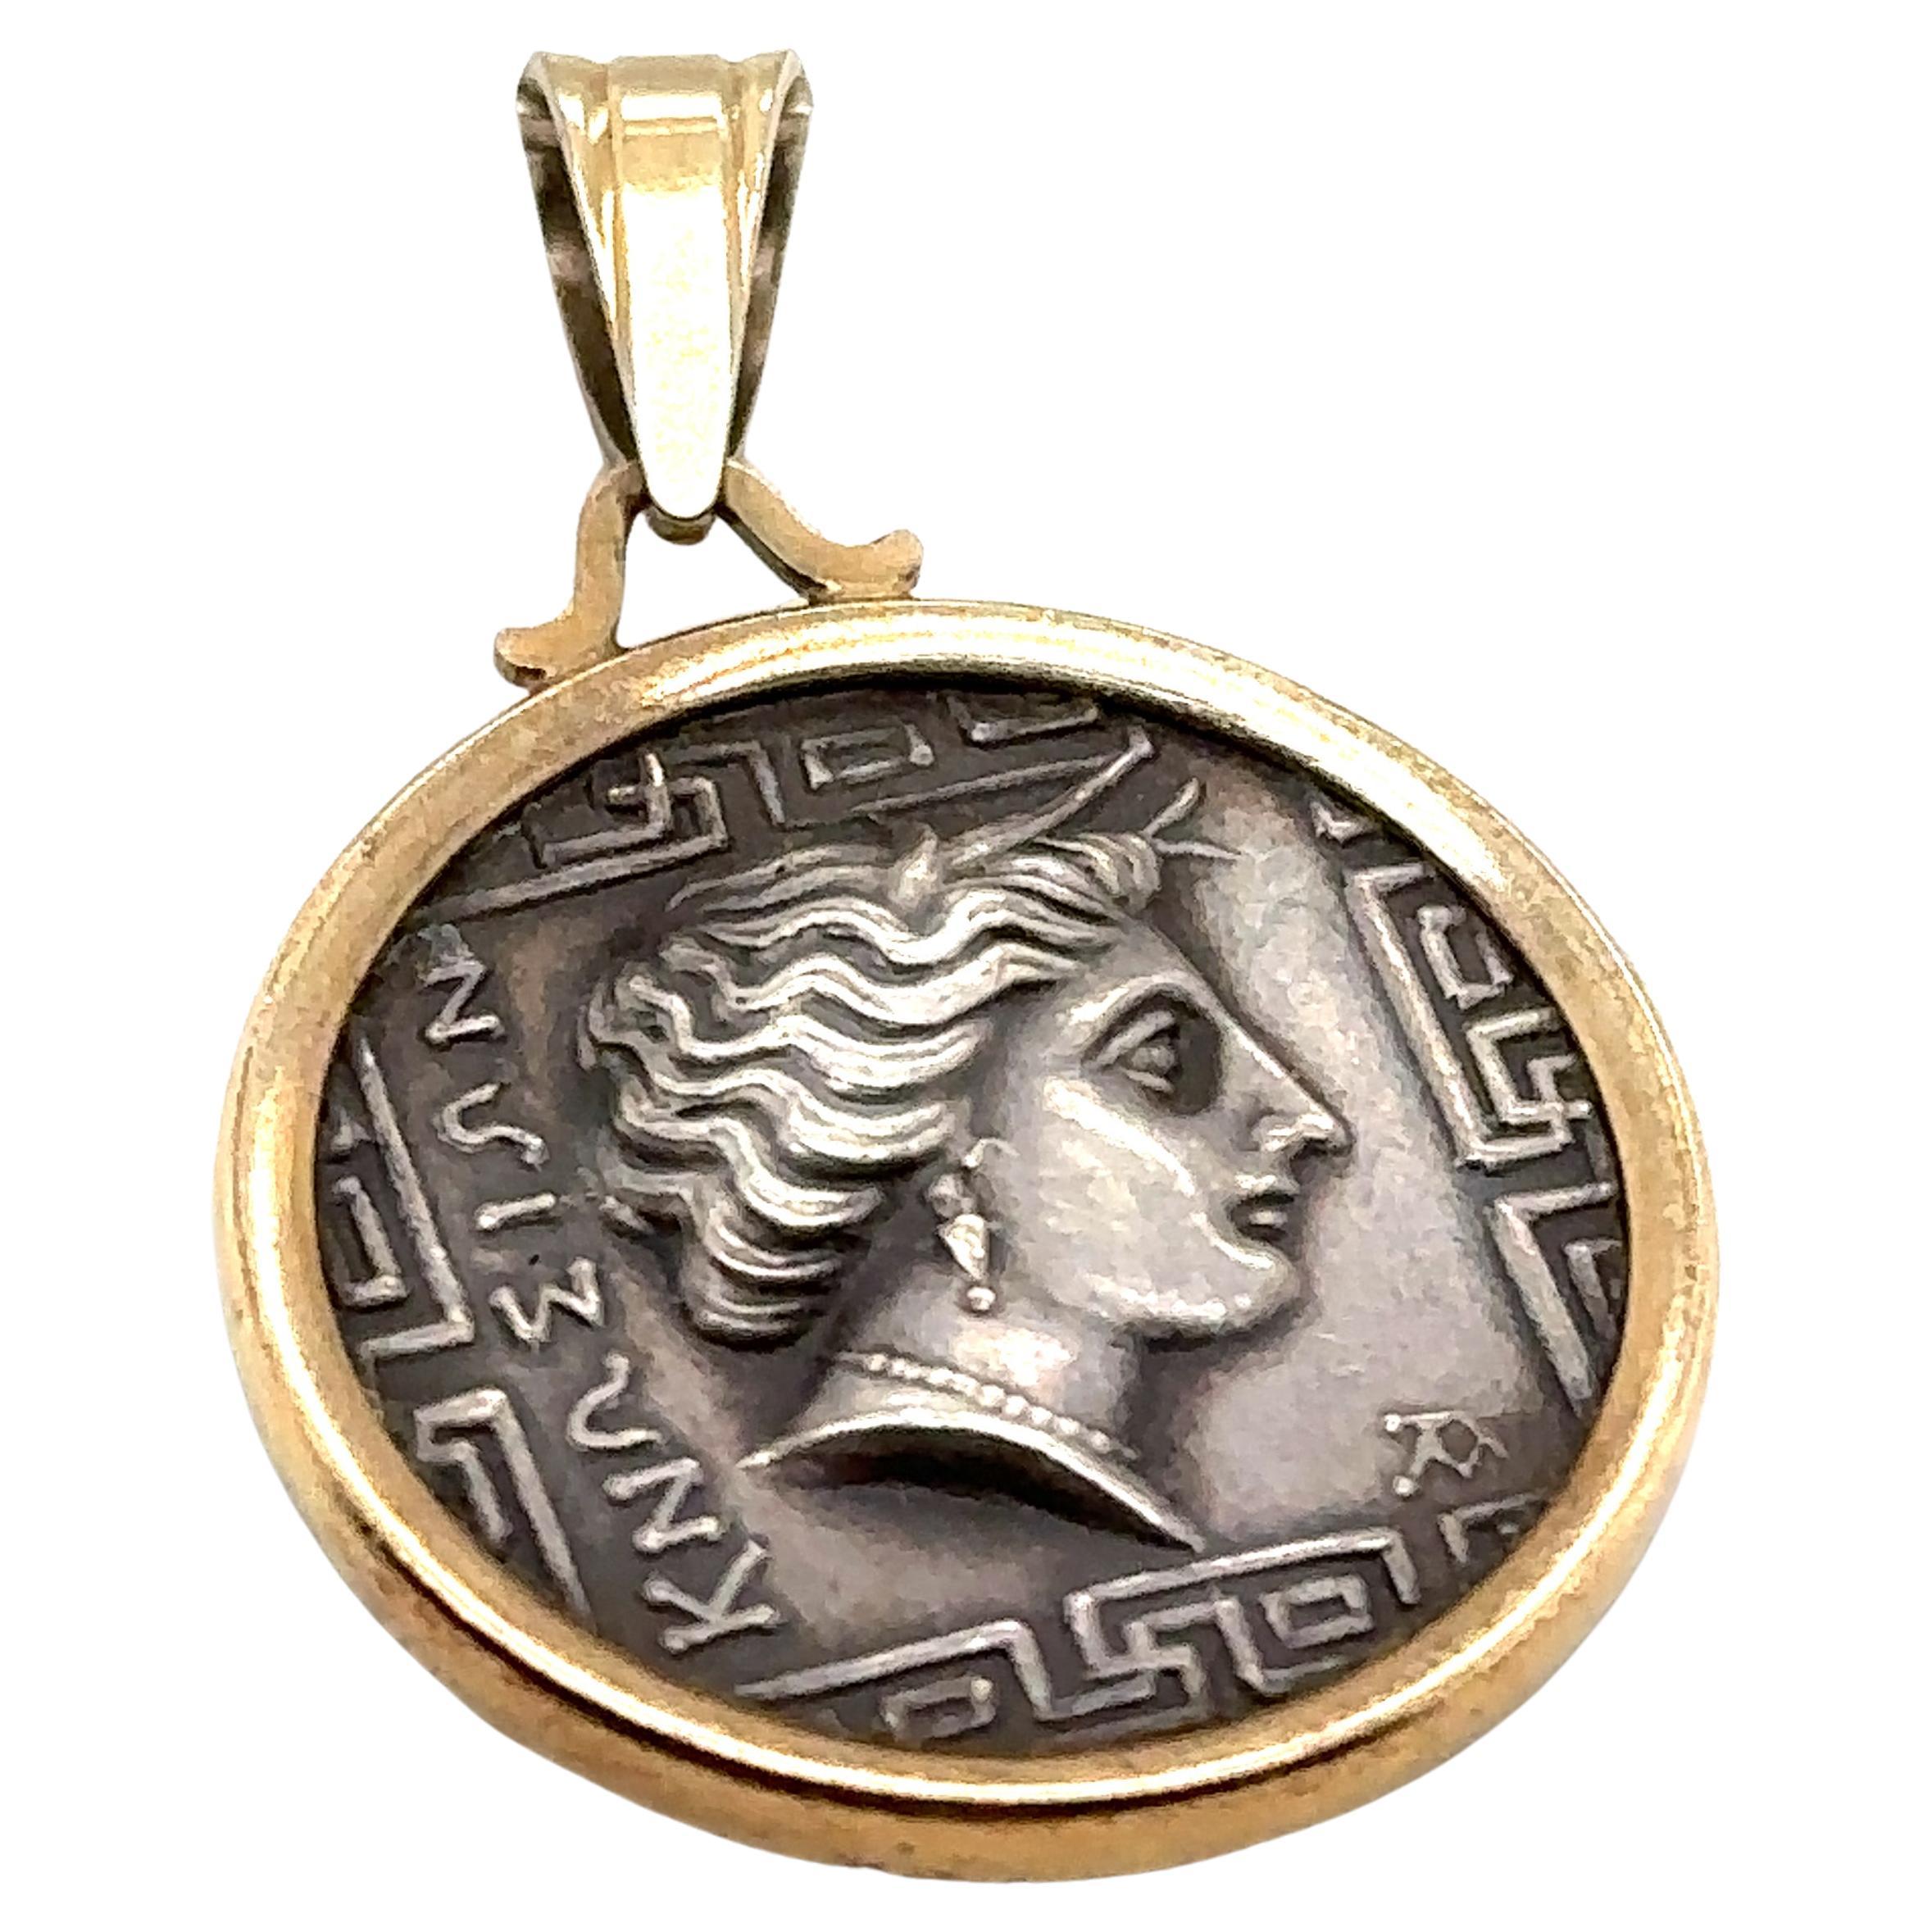 GreekMythos - Ancient Greek Coin Necklace with Owl Goddess Athena Symbol,  Mens Coin Pendant, Unisex Statement Necklace, Men' Jewelry Gift, Greek  Jewelry https://etsy.me/2XDPIdv #silver #birthday #gold #unisexadults  #greekjewelry #greekcoinnecklace ...